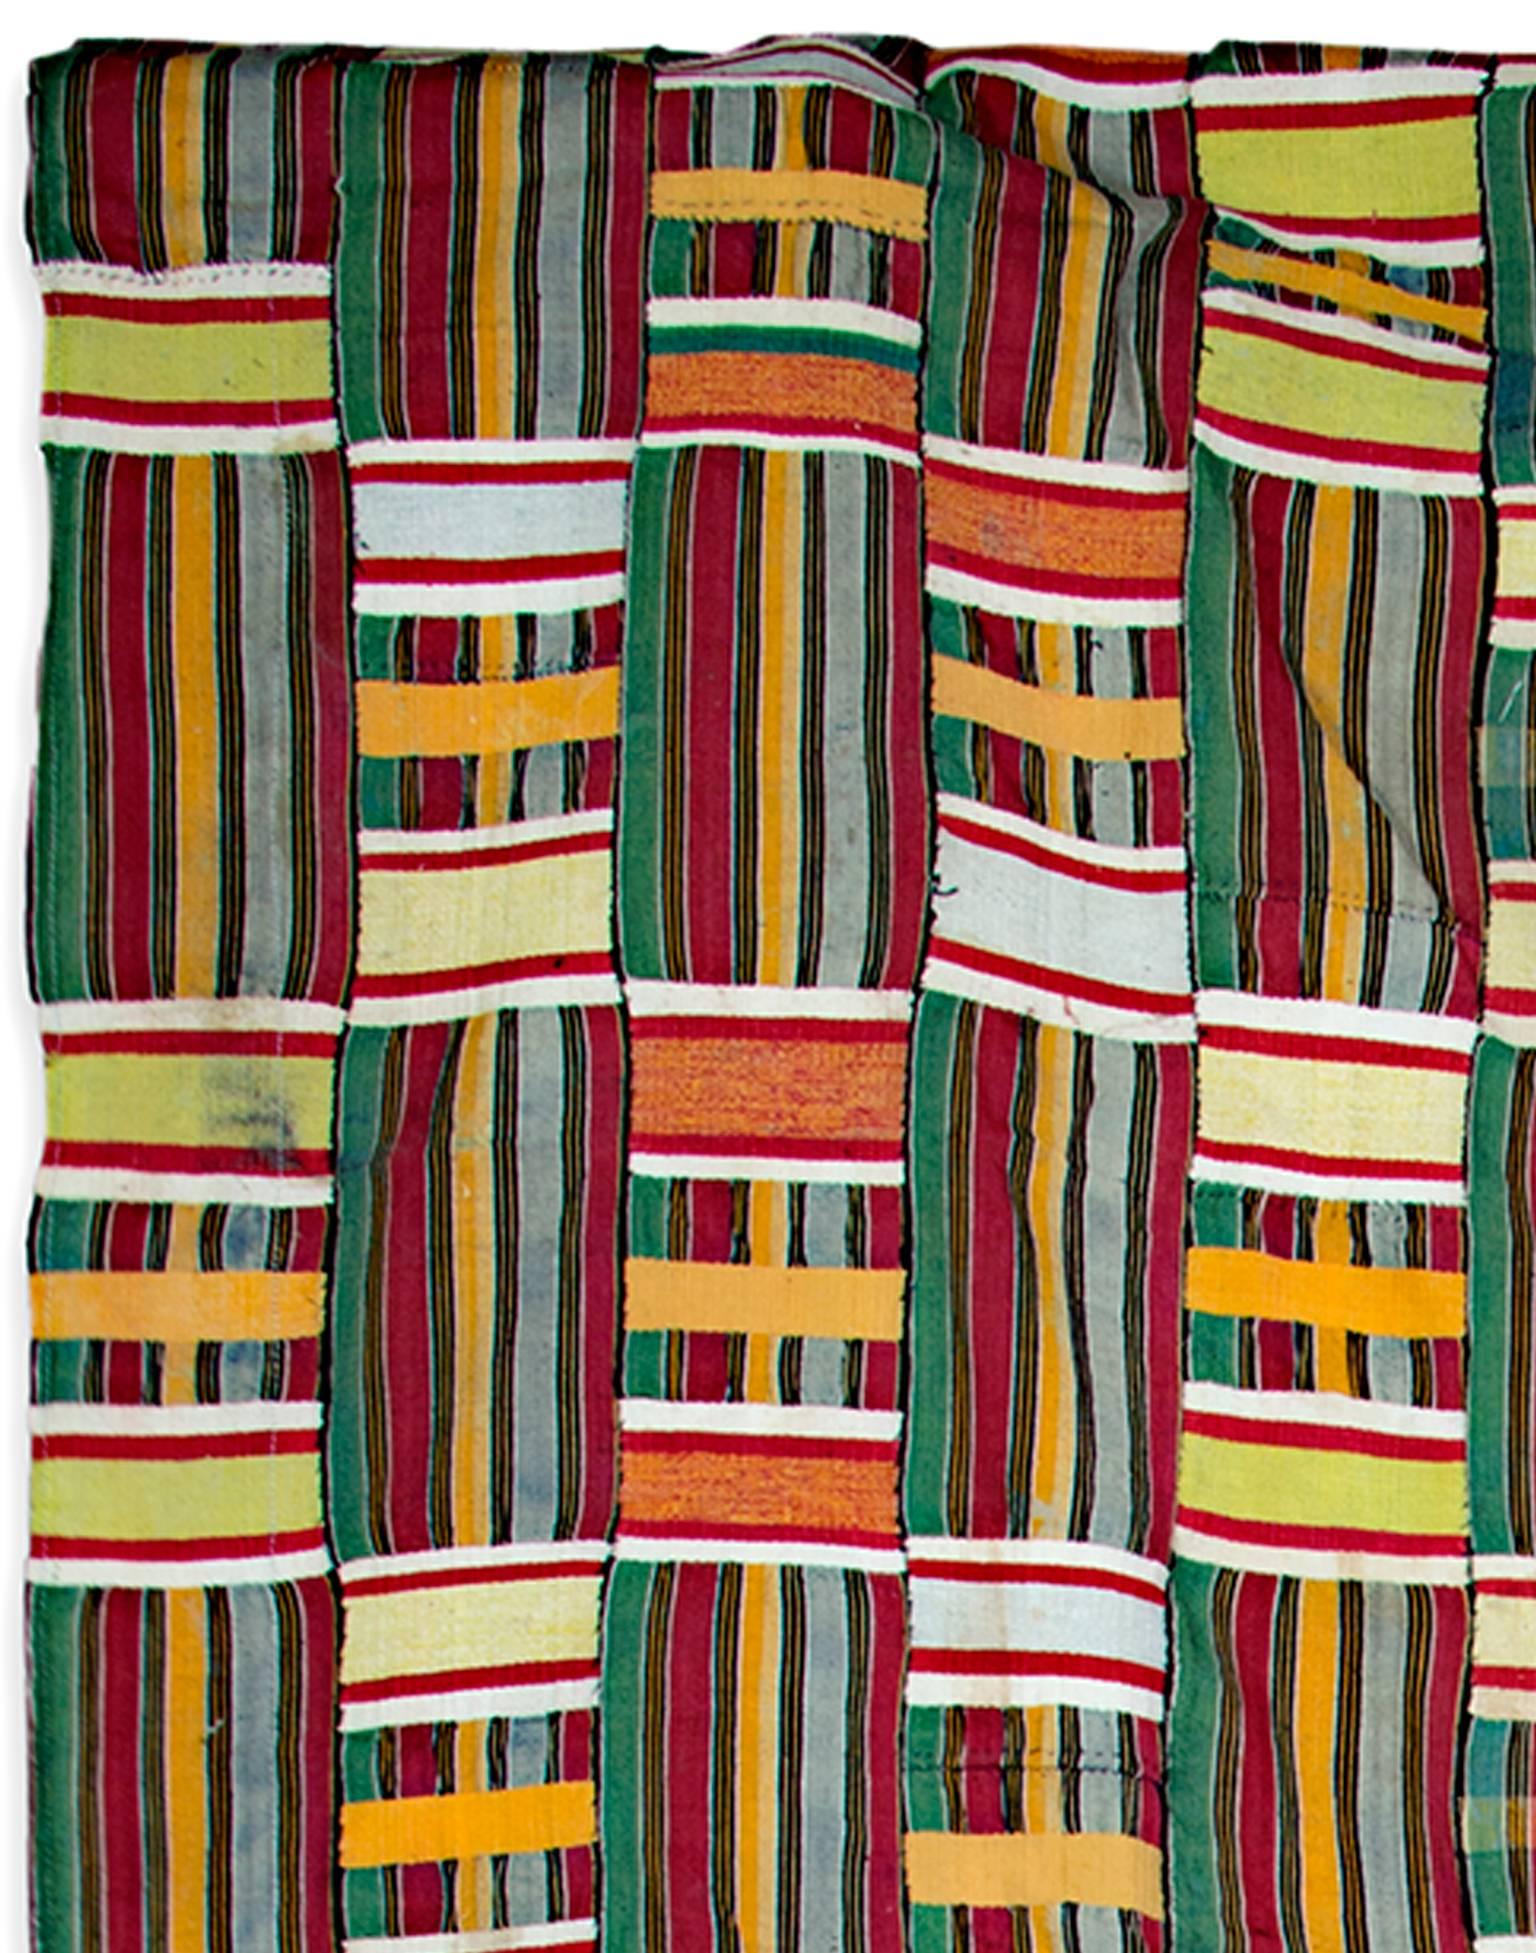 This cotton fabric was made by an unknown Ewe artist. It features red, blue, gold, and green accents. The Ewe people are an African ethnic group. This may be an example of Kente, a type of silk and cotton fabric made of interwoven cloth strips and